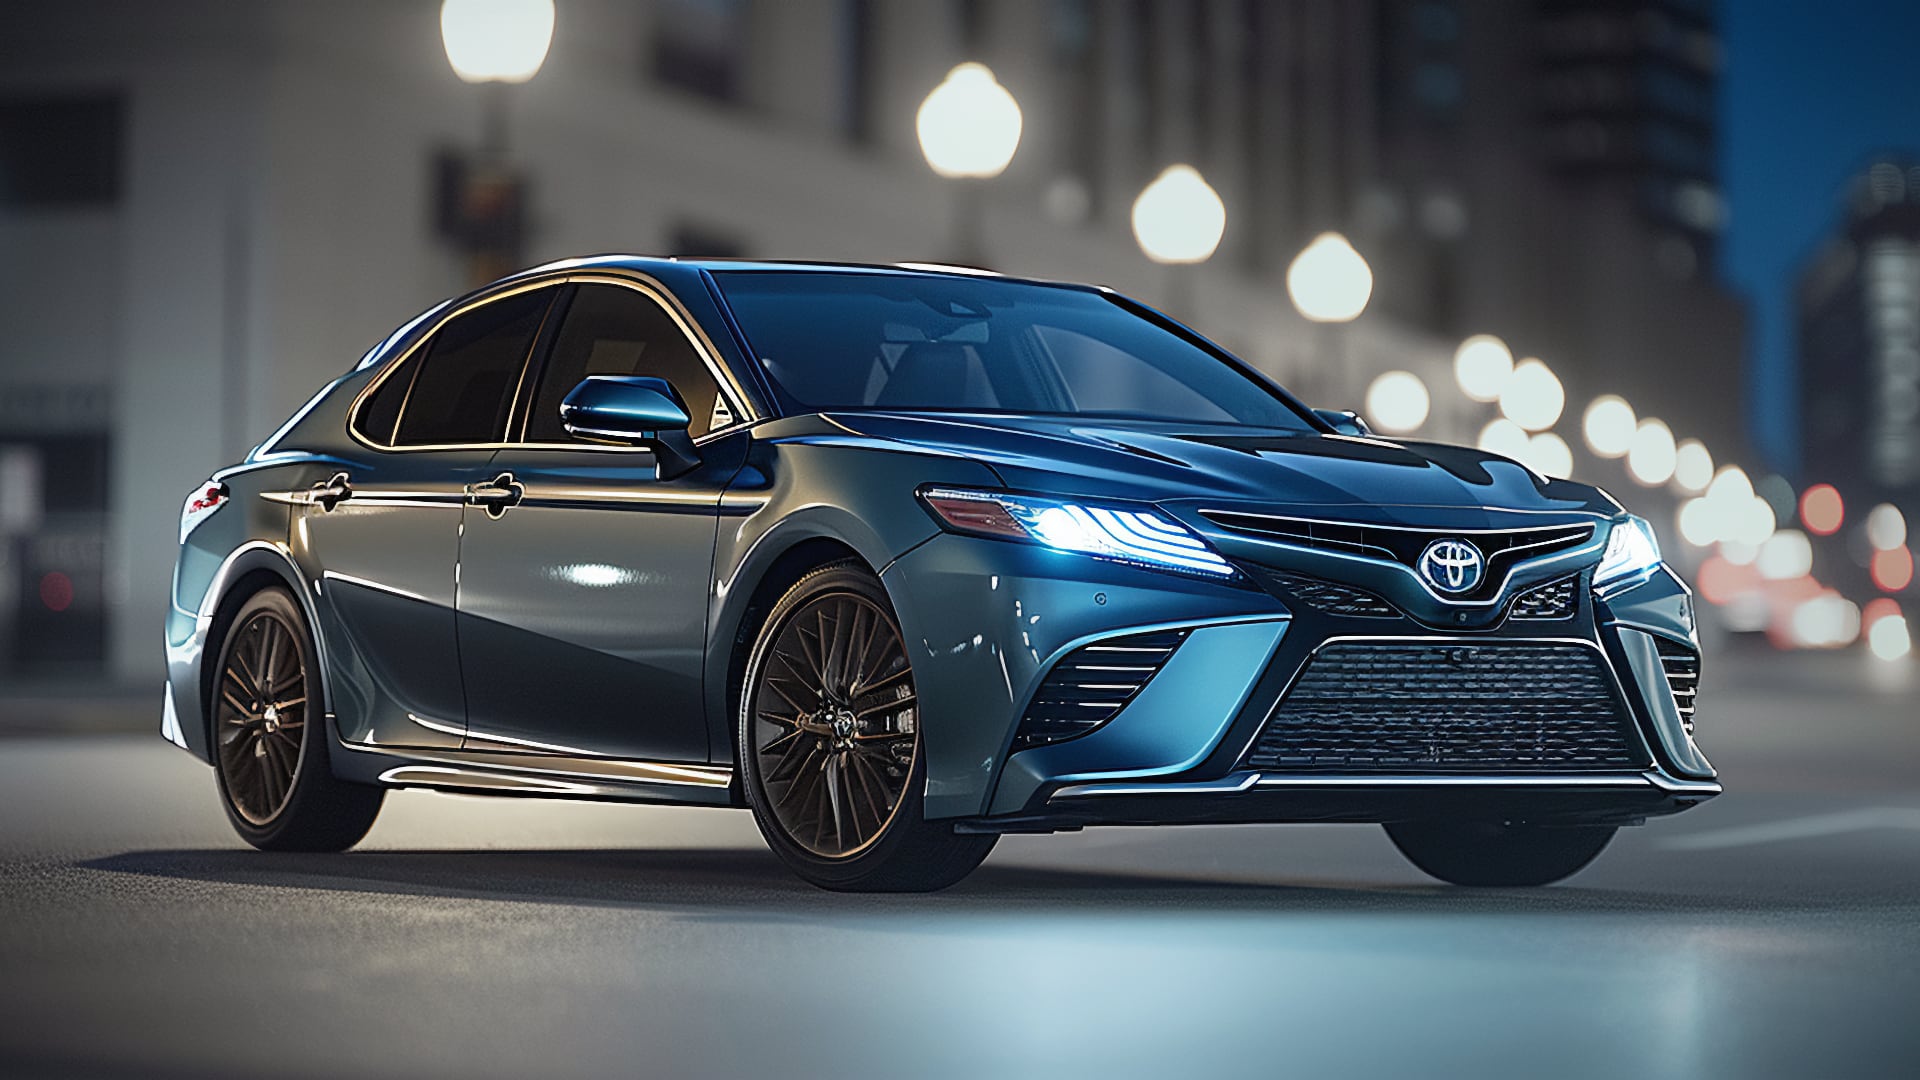 The 2020 Toyota Camry is driving down a city street at night, offering a smooth and enjoyable ride.